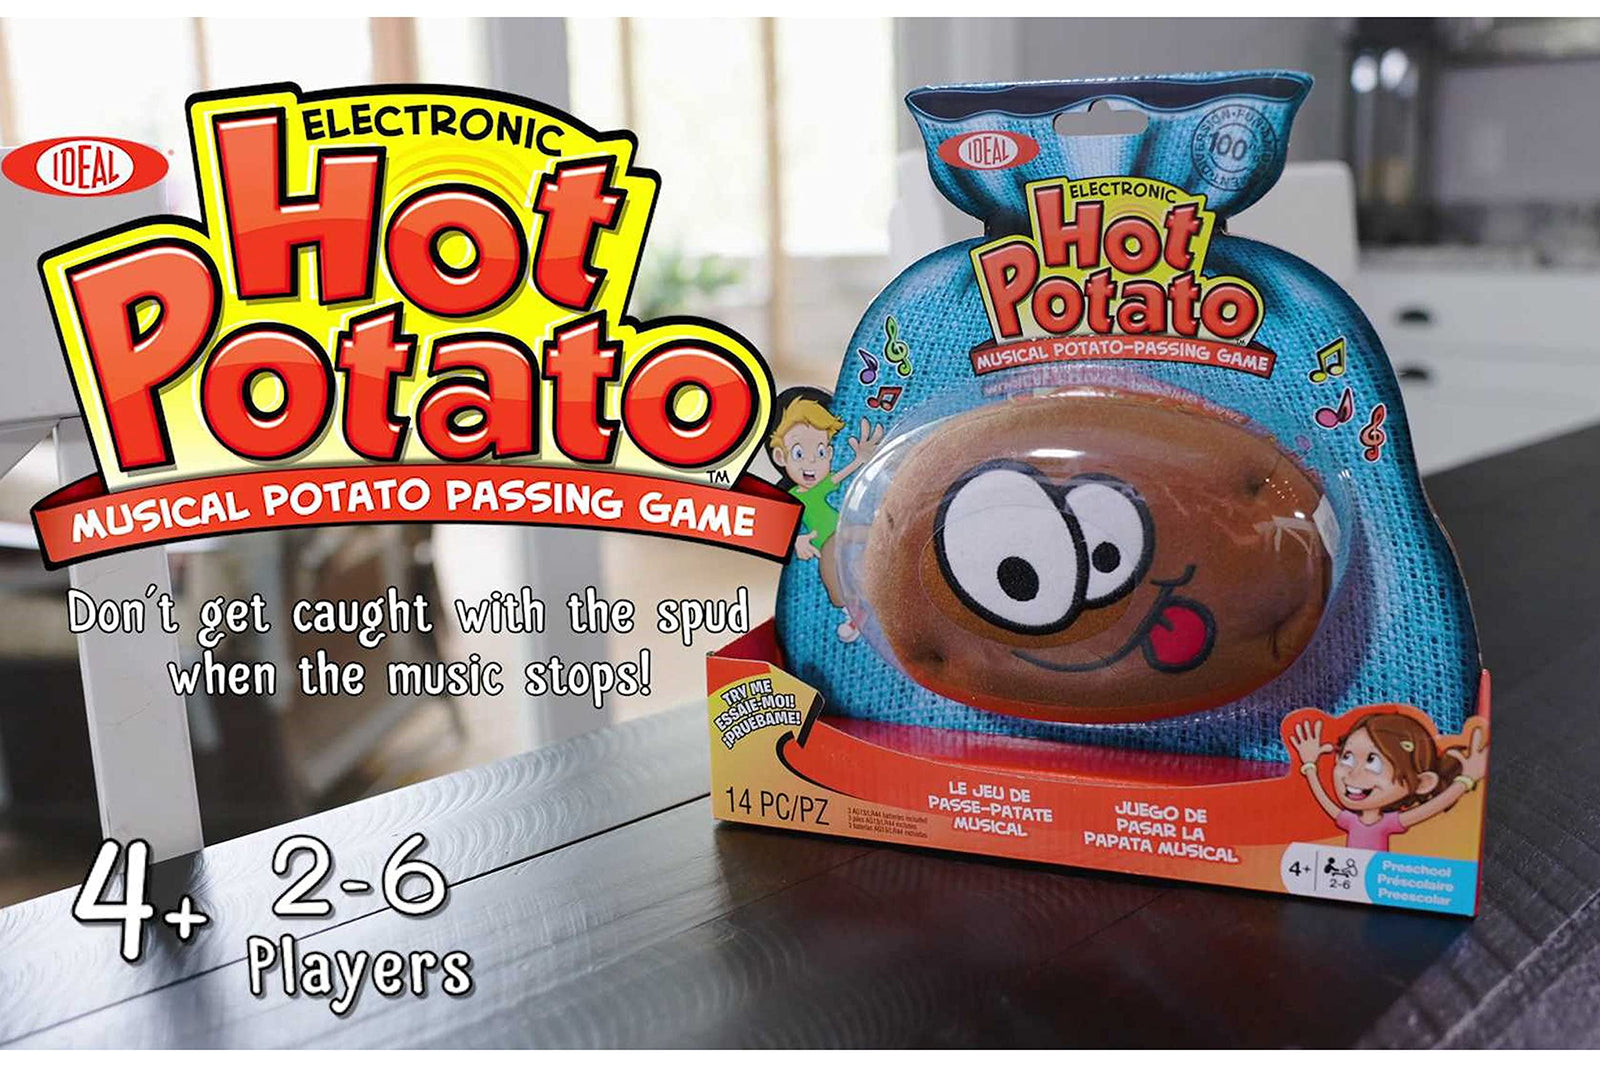 Ideal Hot Potato Electronic Musical Passing Kids Party Game, Don’t Get Caught With the Spud When the Music Stops! Ages 4+, 2-6 Players